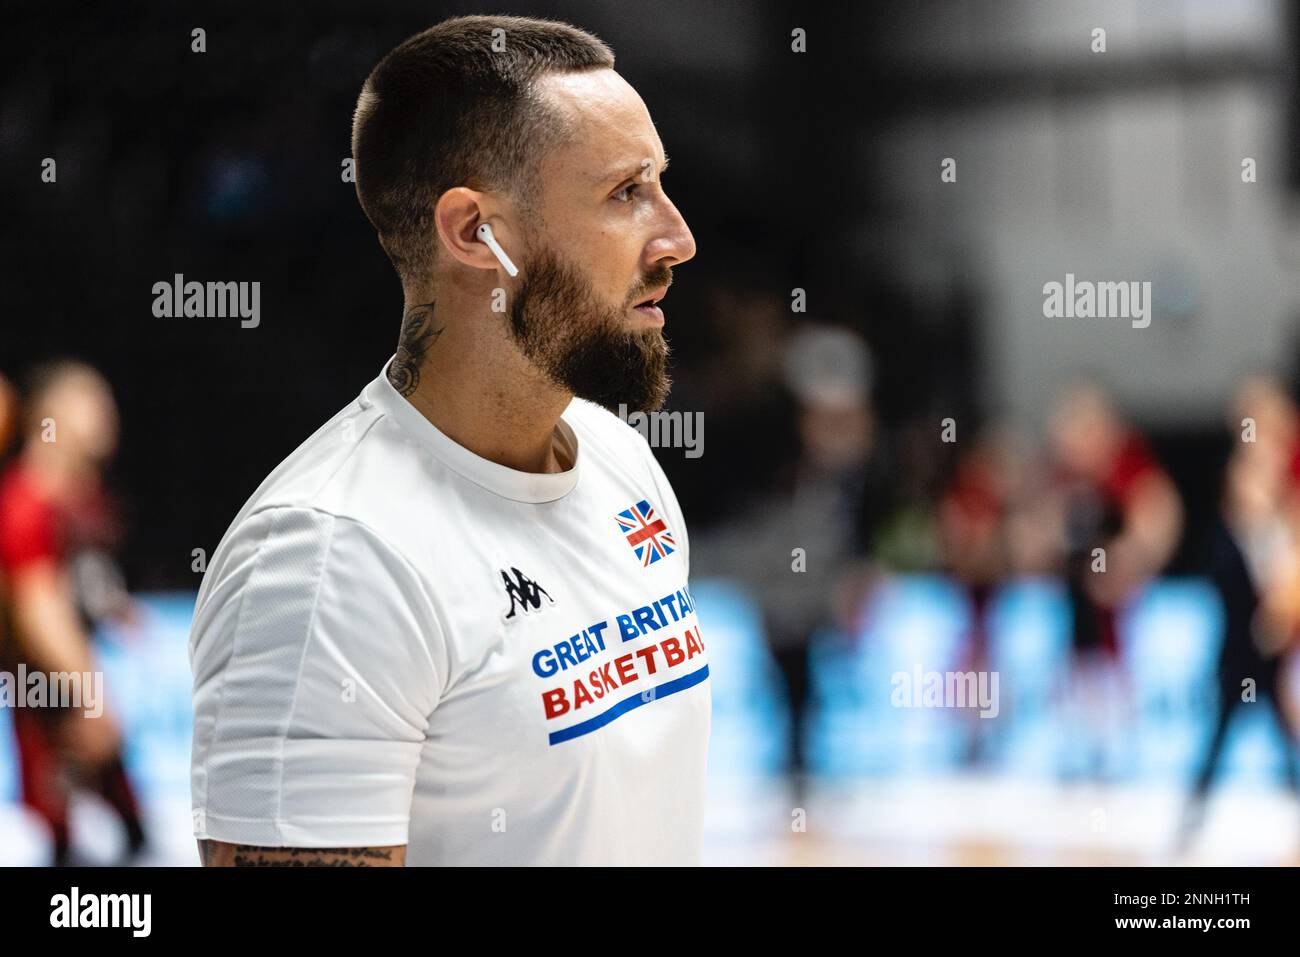 GB mens Basketball team lose to Belgium 59- 88 in a FIBA World Cup  qualifier at Newcastle Vertu Arena on 24 February, 2023. GB's Ben Mockford  during warm ups. copyright caroljmoir/Alamy Stock Photo - Alamy